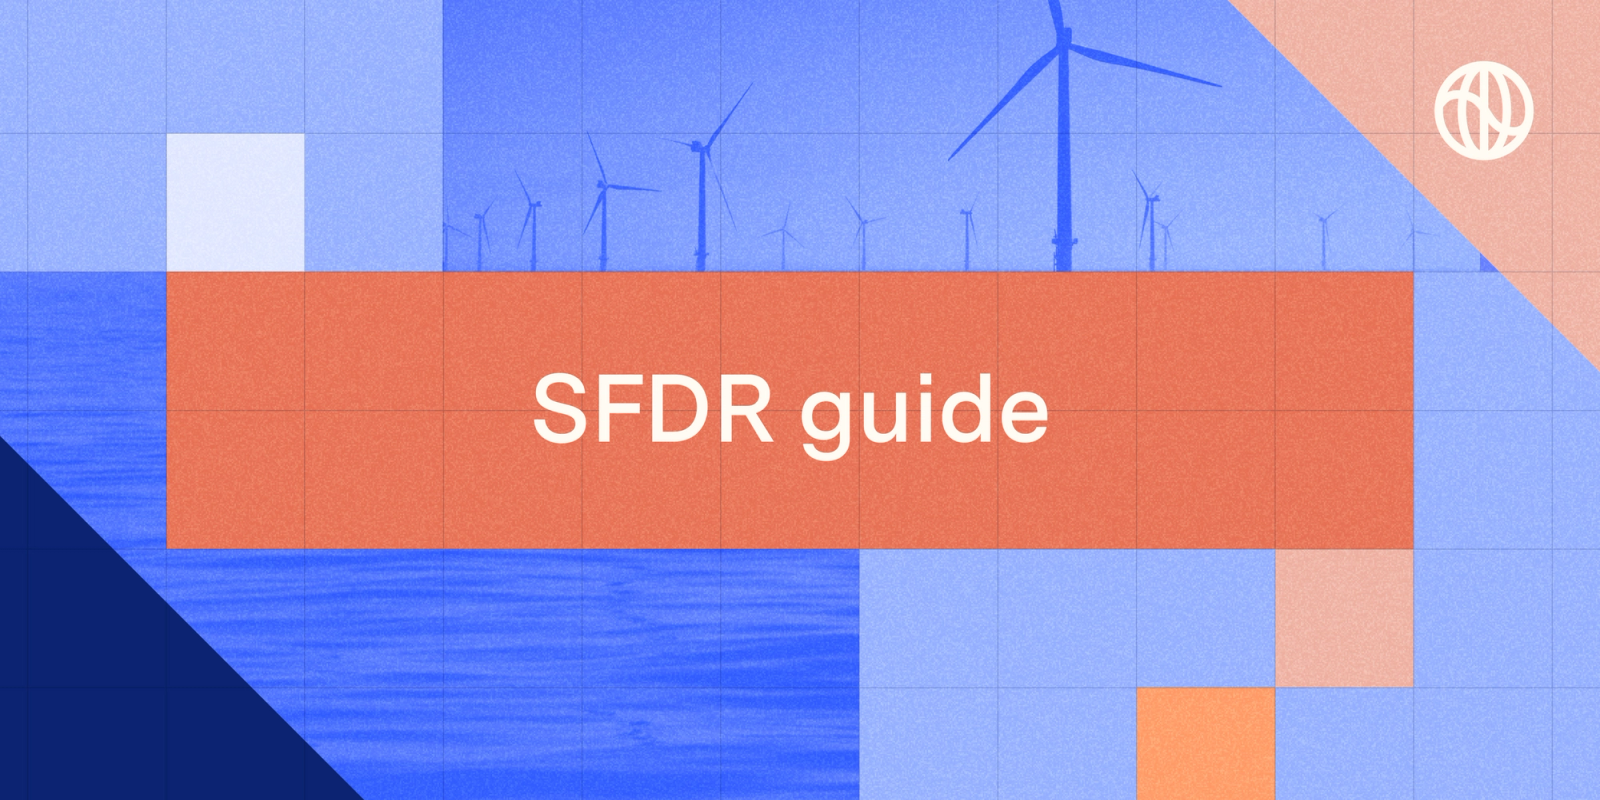 Demystifying SFDR for financial firms and advisors